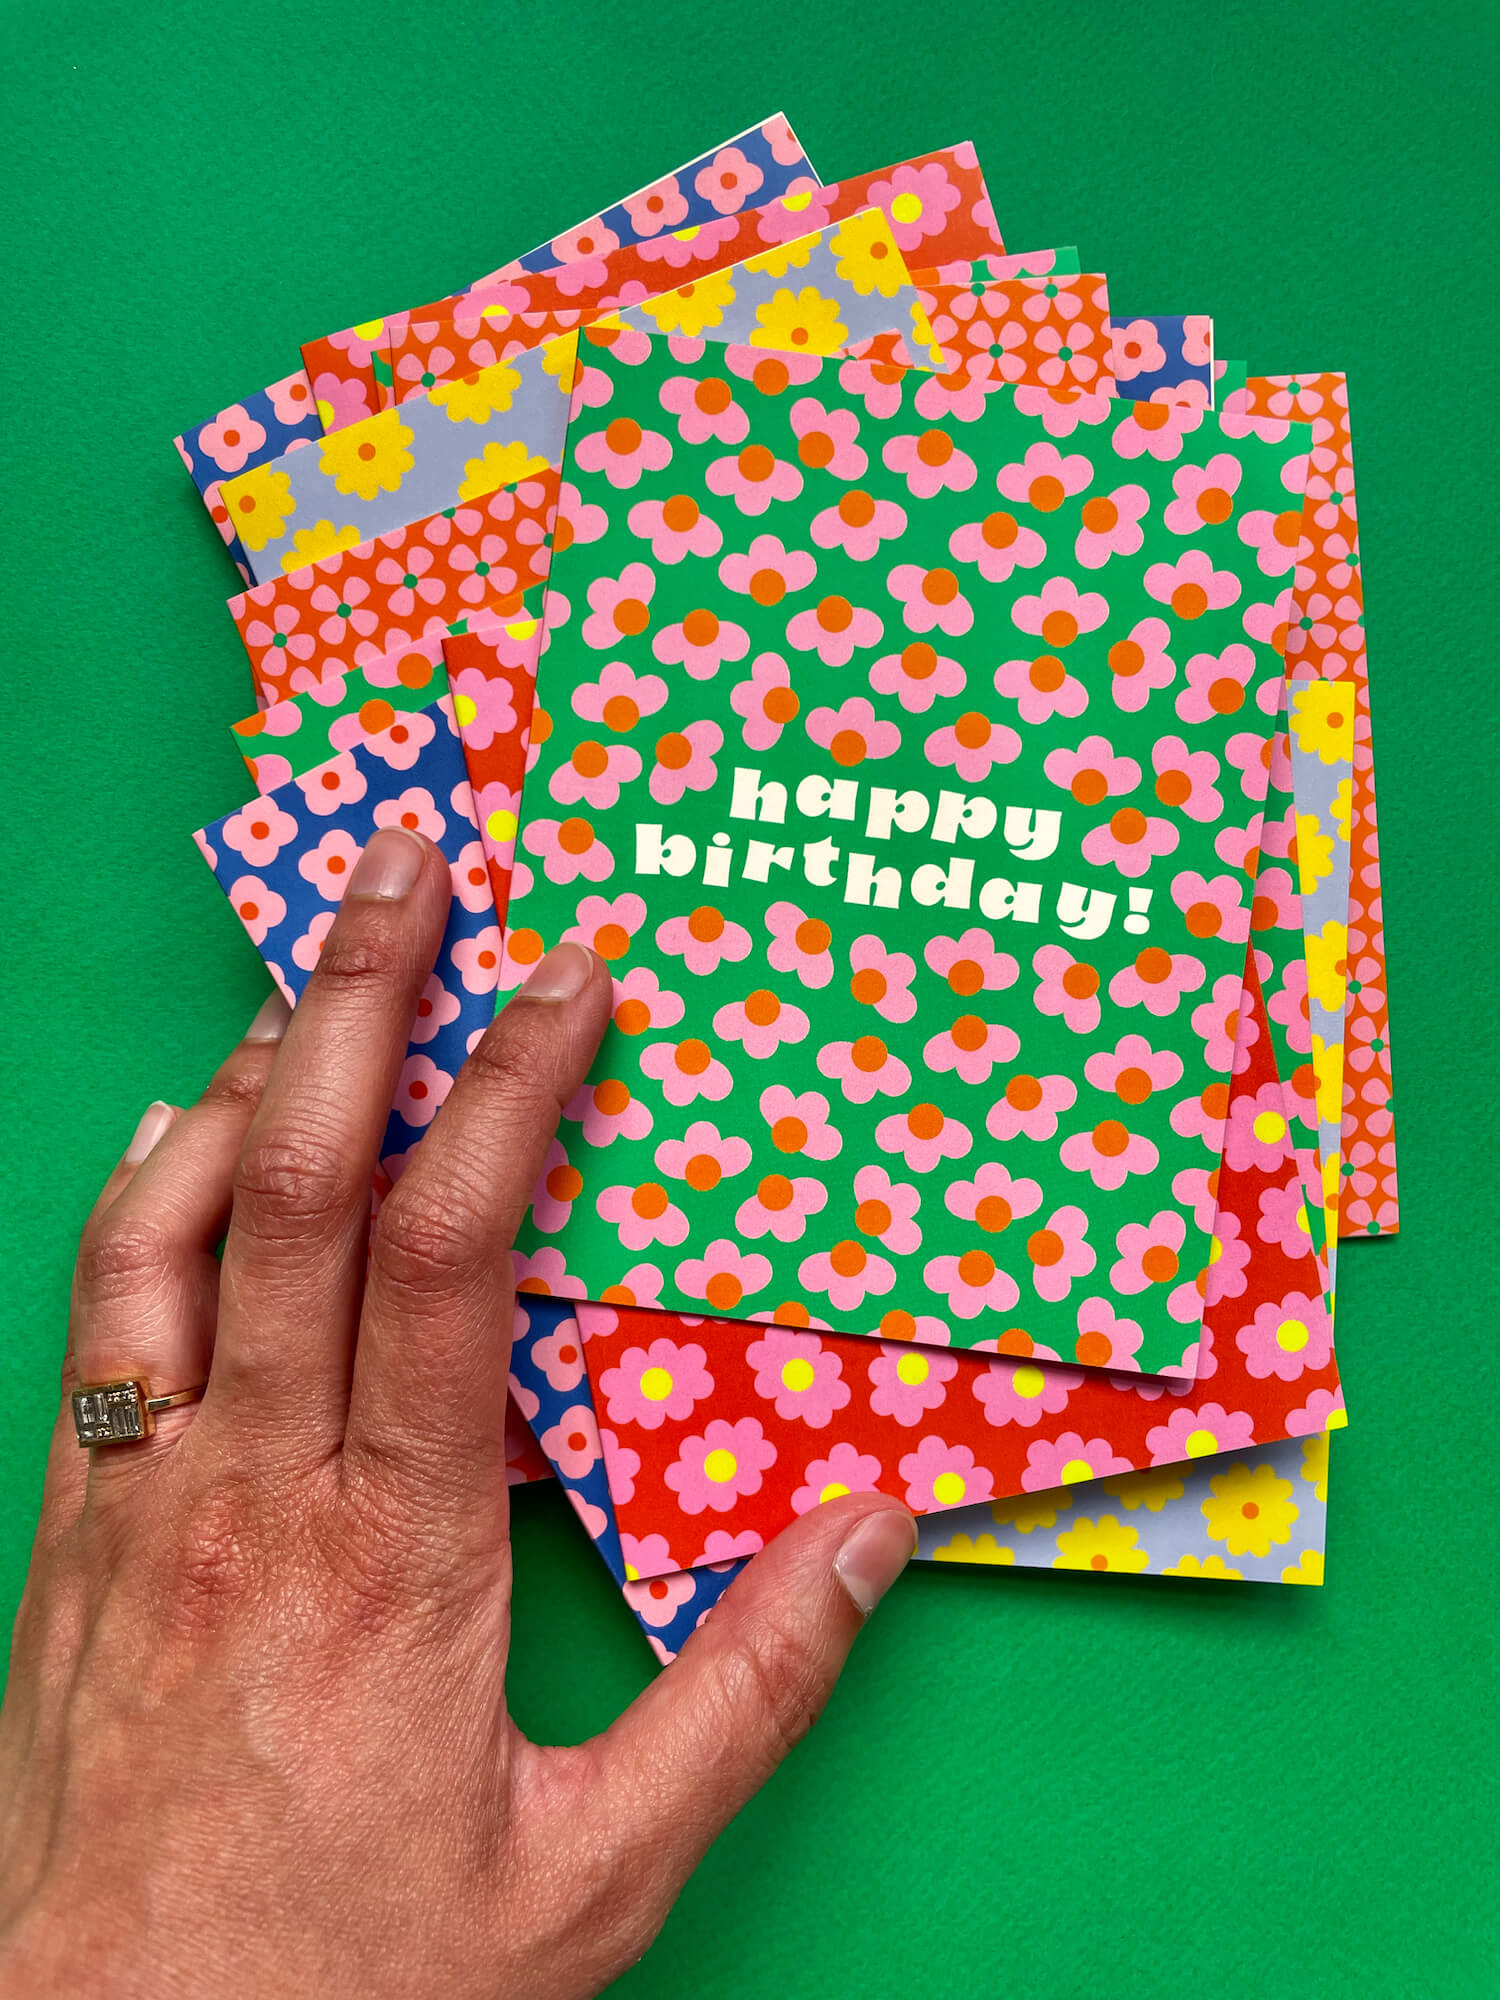 a hand holding a birthday card on top of a green surface